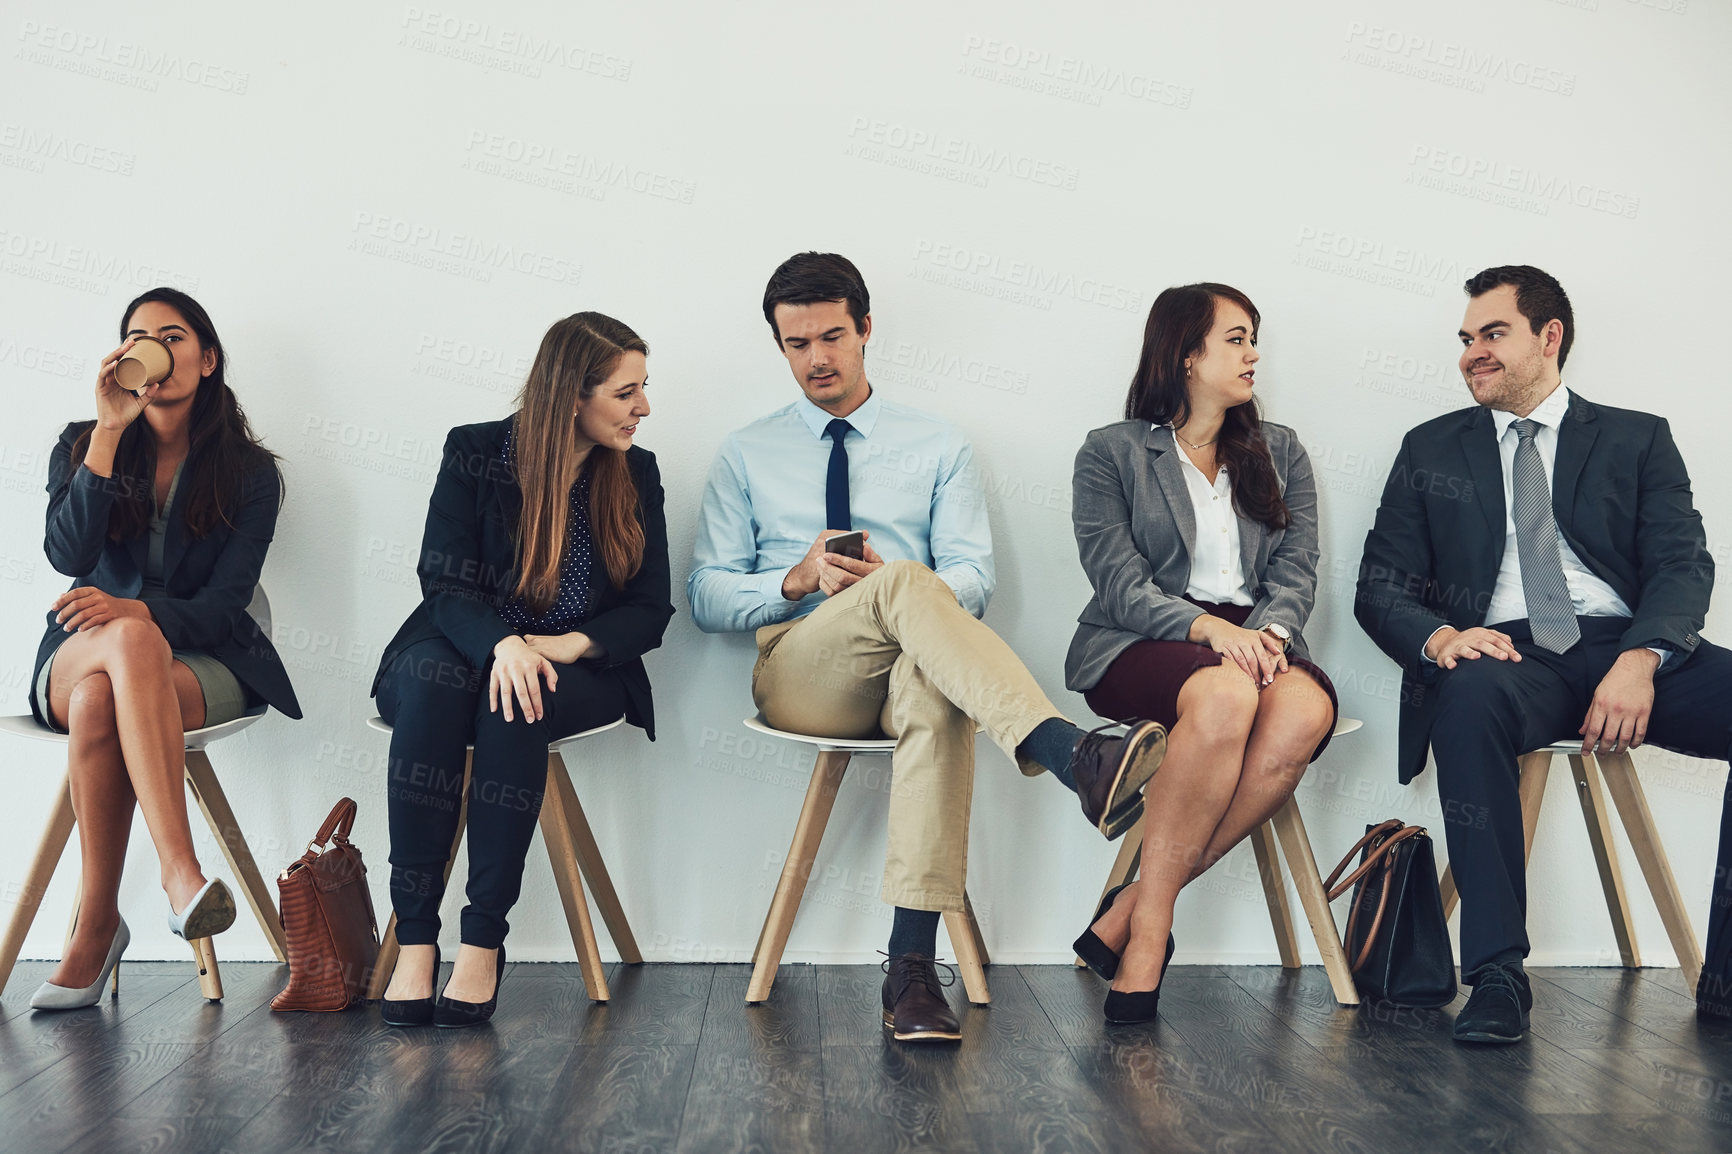 Buy stock photo Studio shot of a group of businesspeople using wireless technology while waiting in line